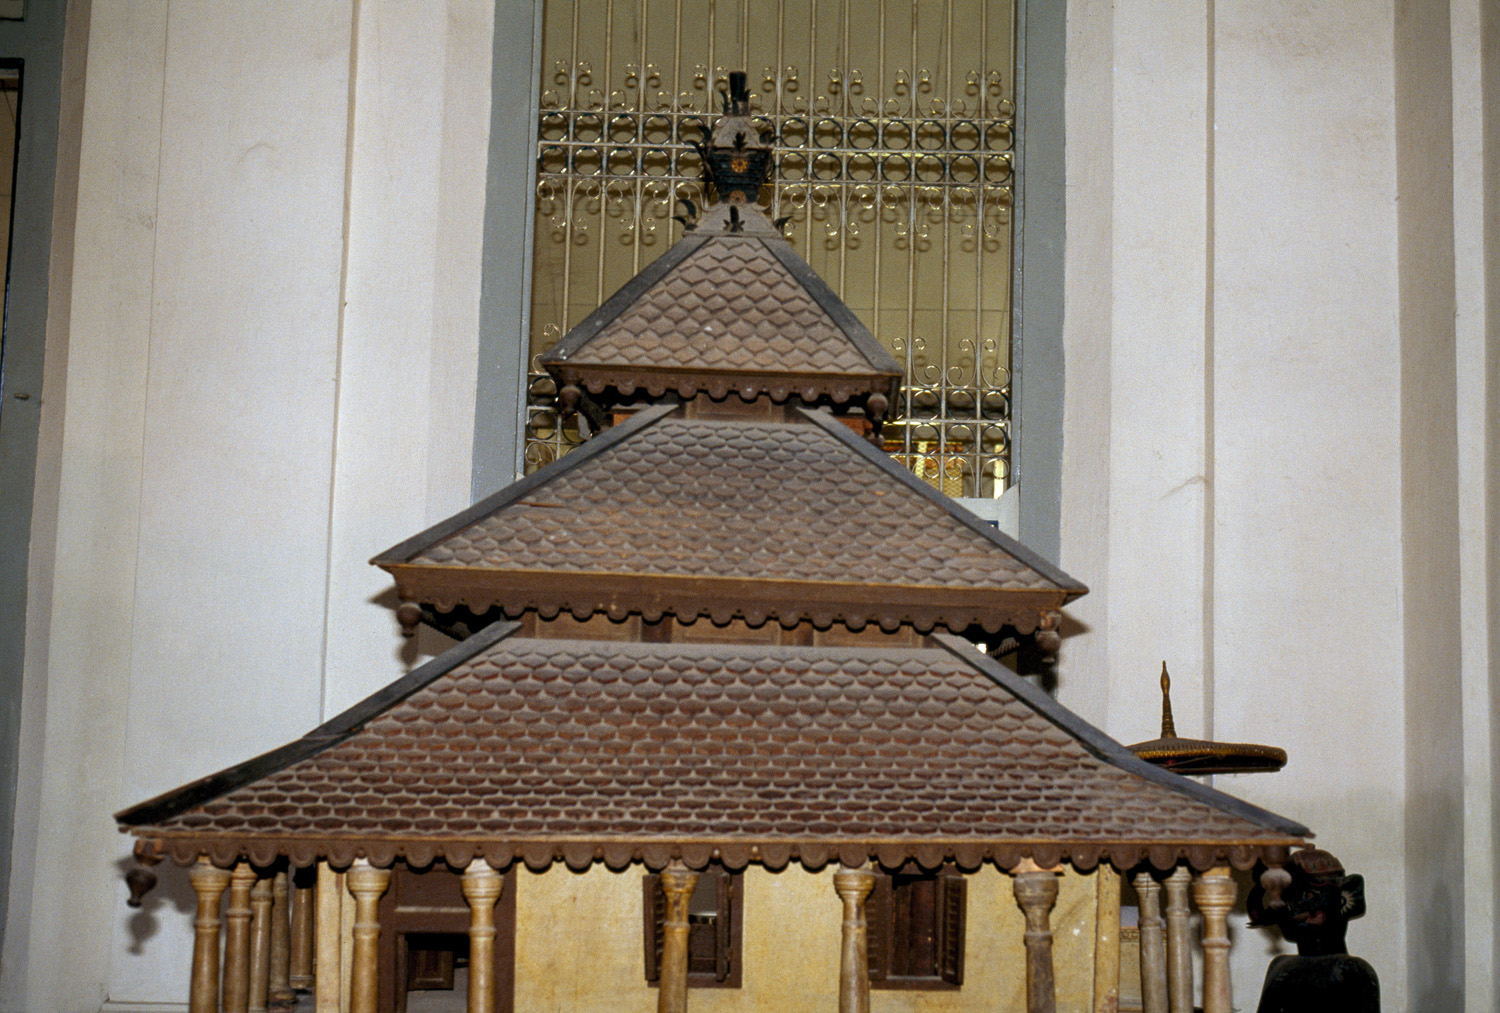 Model of the mosque in the Solo (Surakarta) Museum